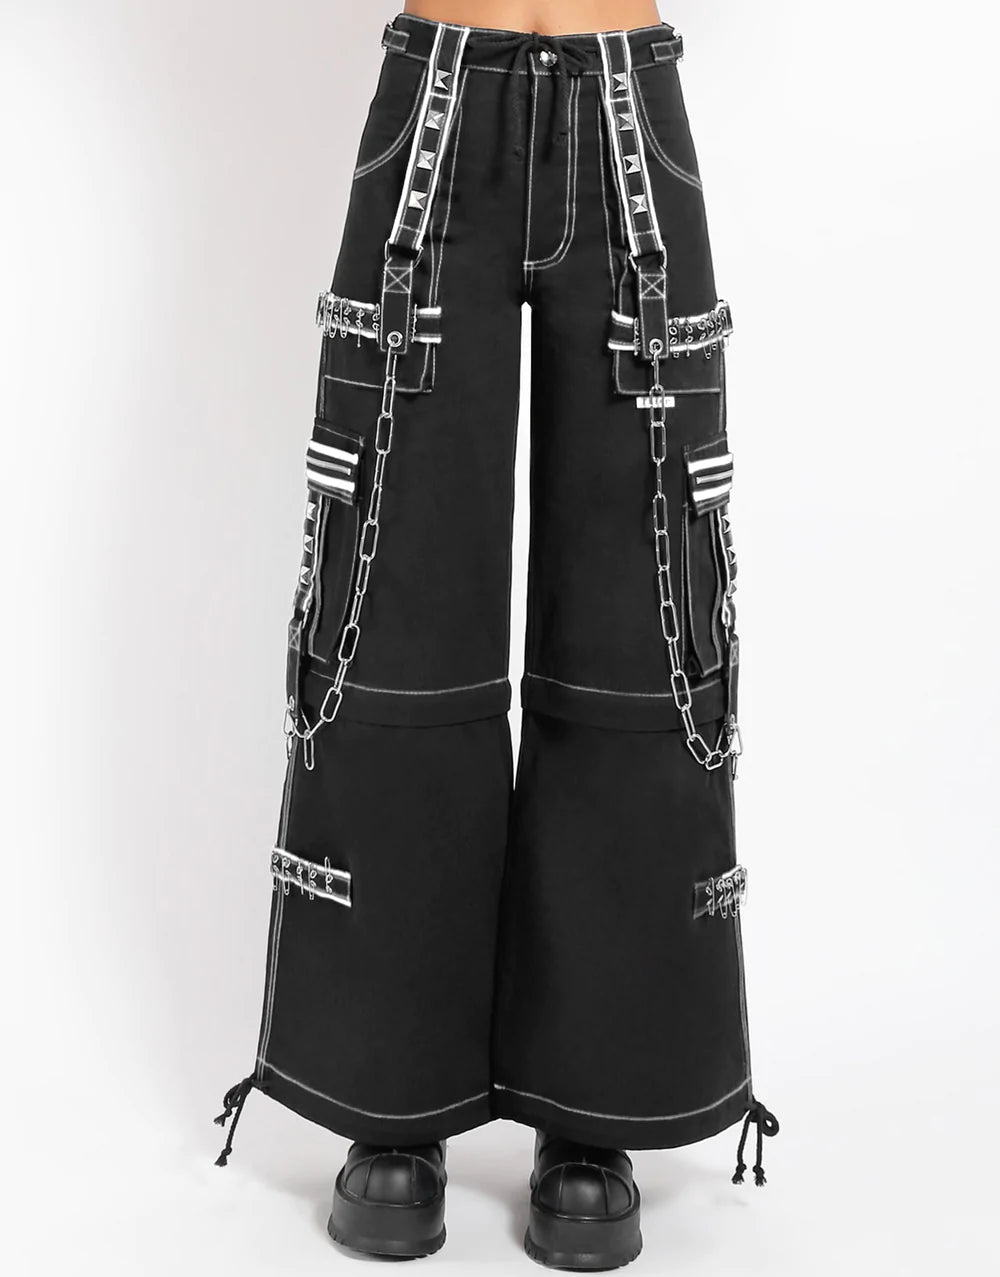 UNISEX Crazy Piper Pants w/ White Details – Hot Rock Hollywood